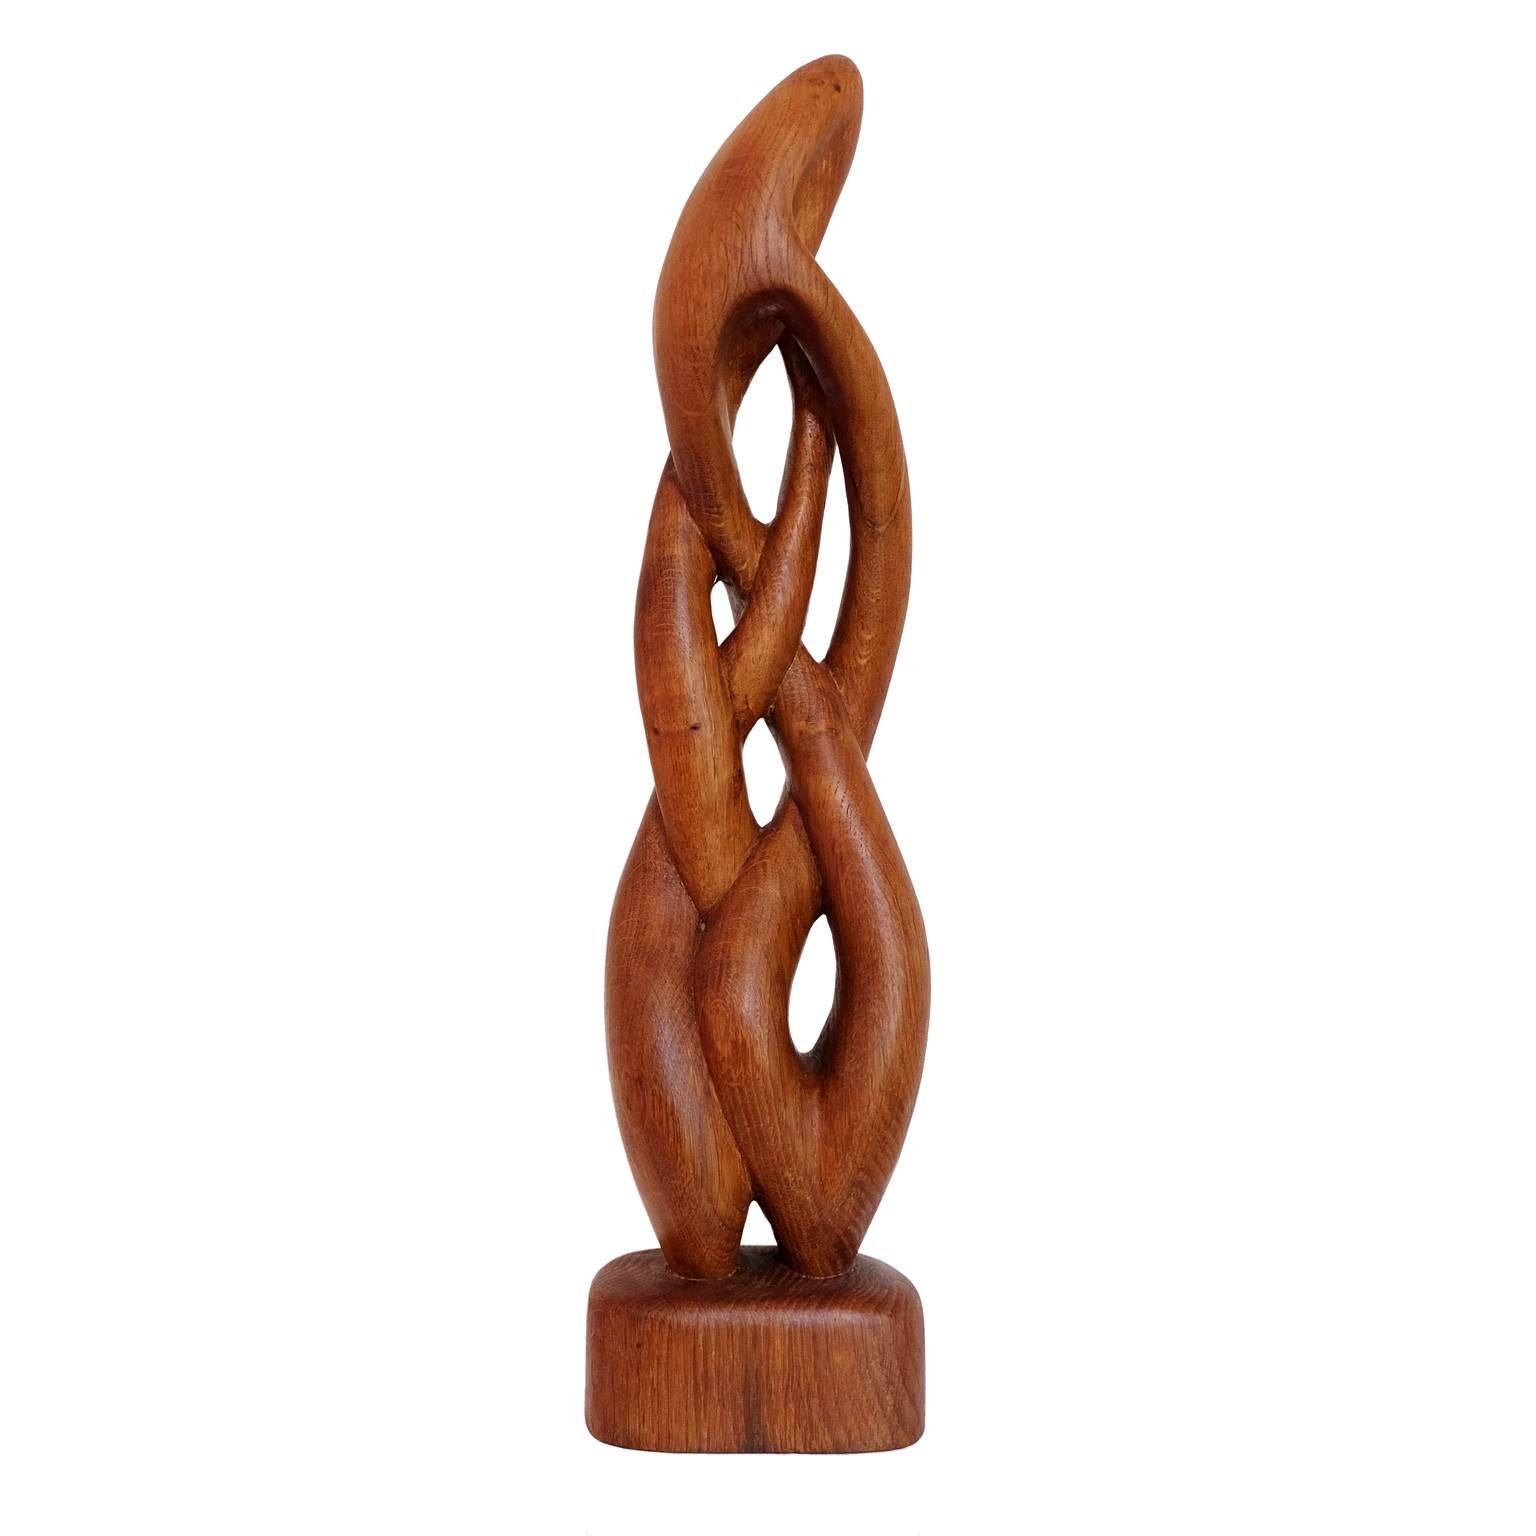 1960s abstract wooden sculpture designed and made in the UK.

Hand carved figured teak twisted form. 

Measures: H 58 cm x W 14 cm x D 12 cm.